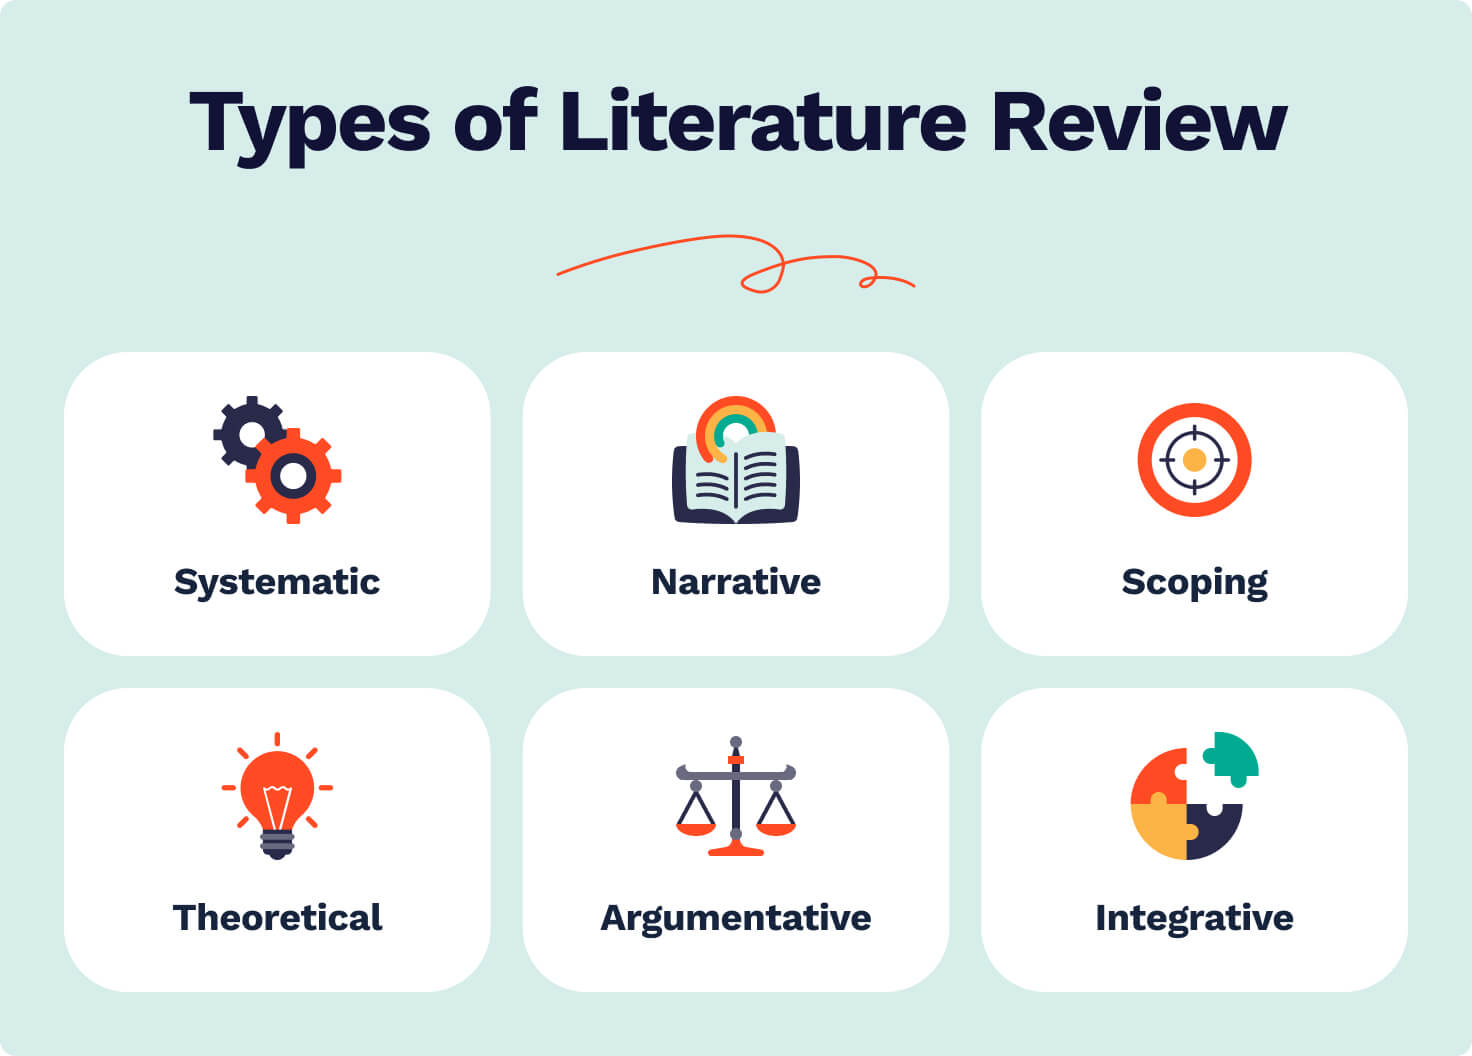 4 types of literature review